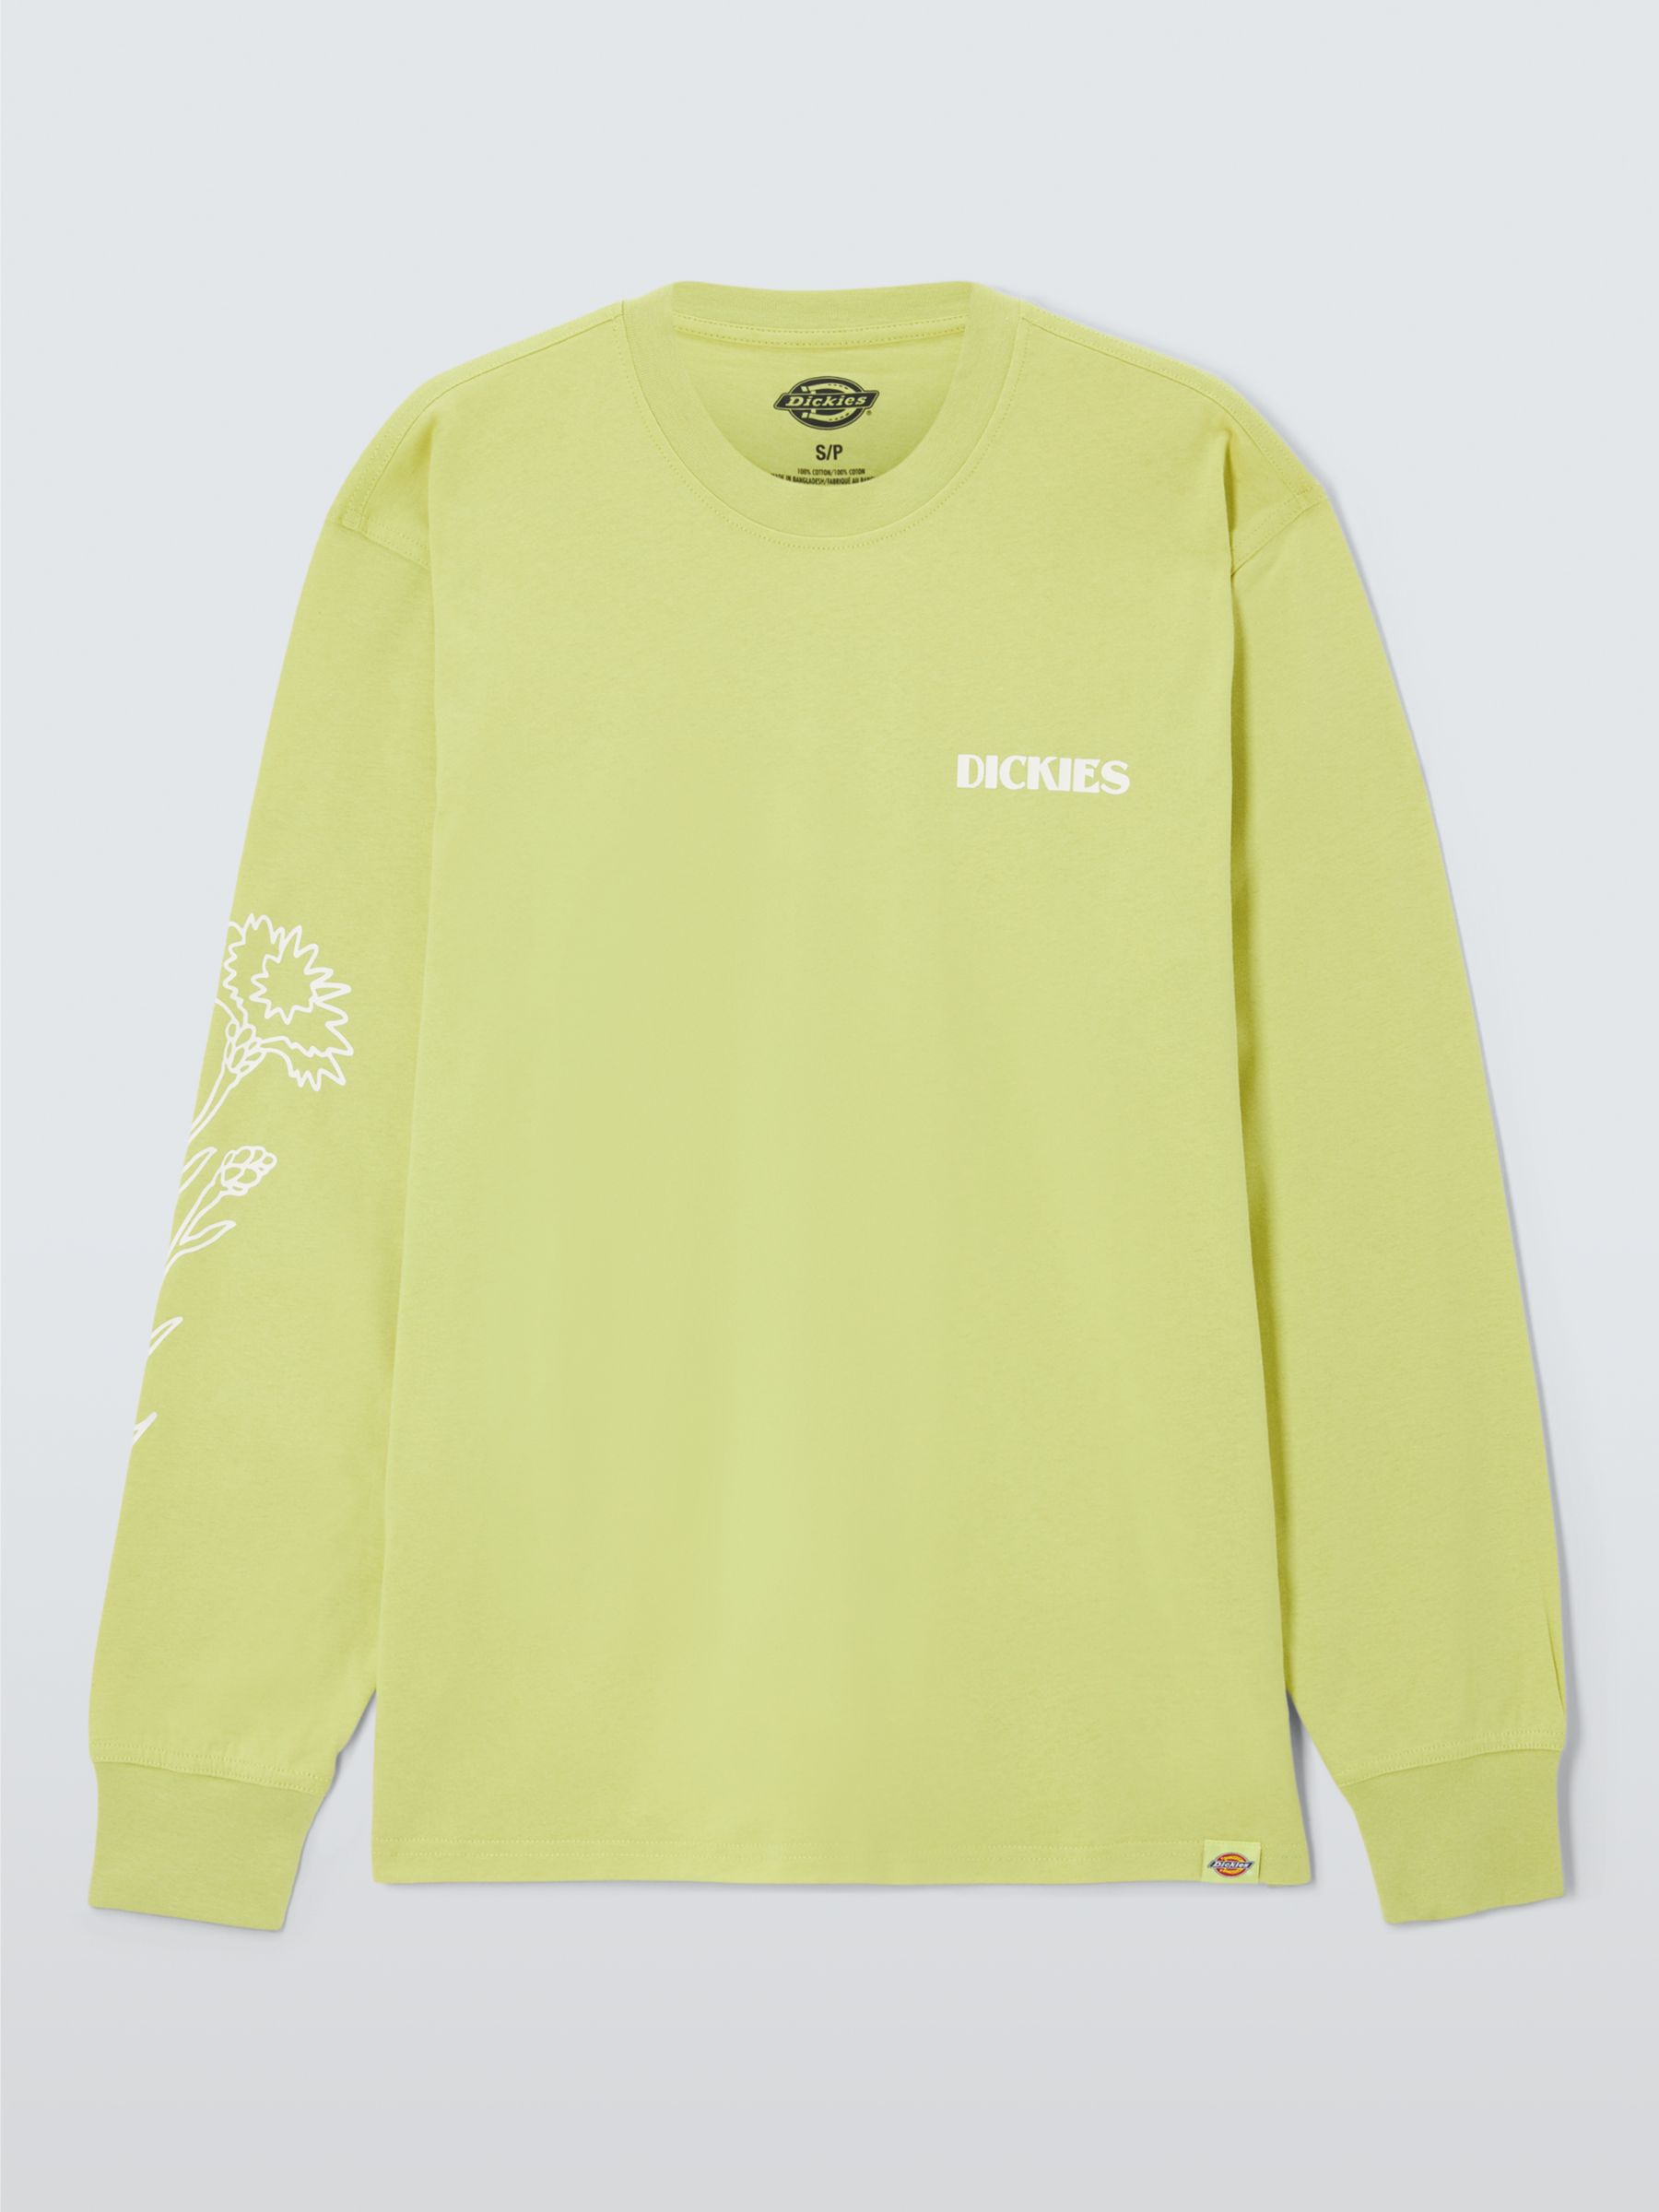 Dickies Timberville Graphic Long Sleeve T-Shirt, Pale Green, XL